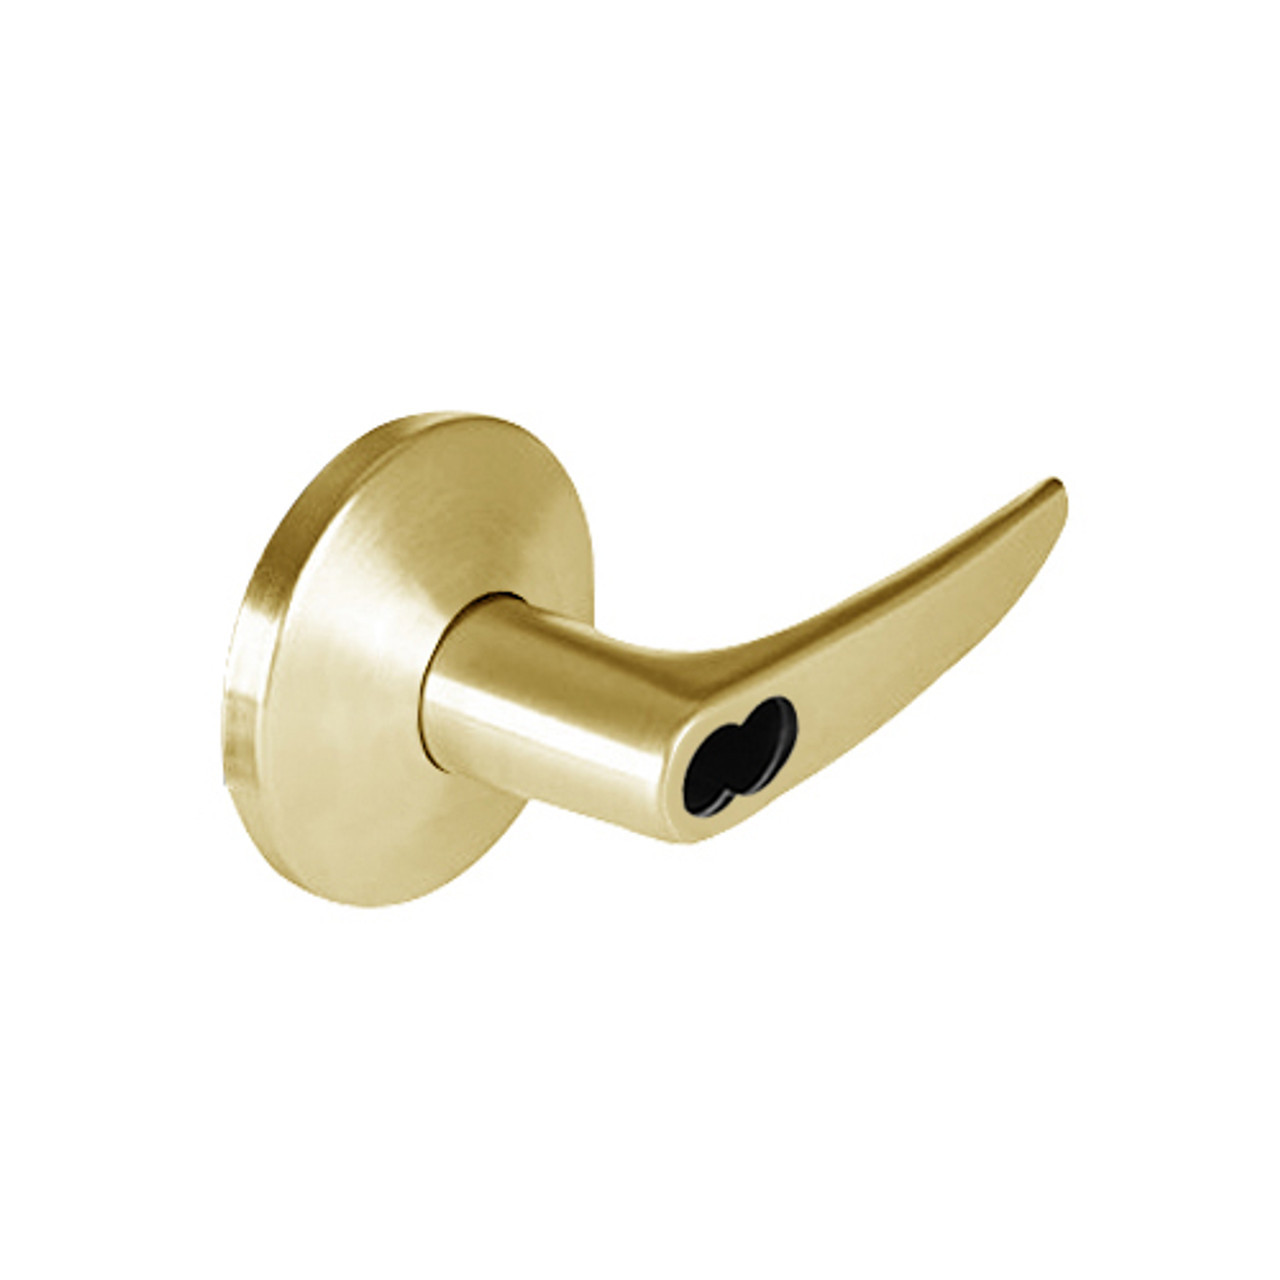 9K37RD16LS3605LM Best 9K Series Special Function Cylindrical Lever Locks with Curved without Return Lever Design Accept 7 Pin Best Core in Bright Brass